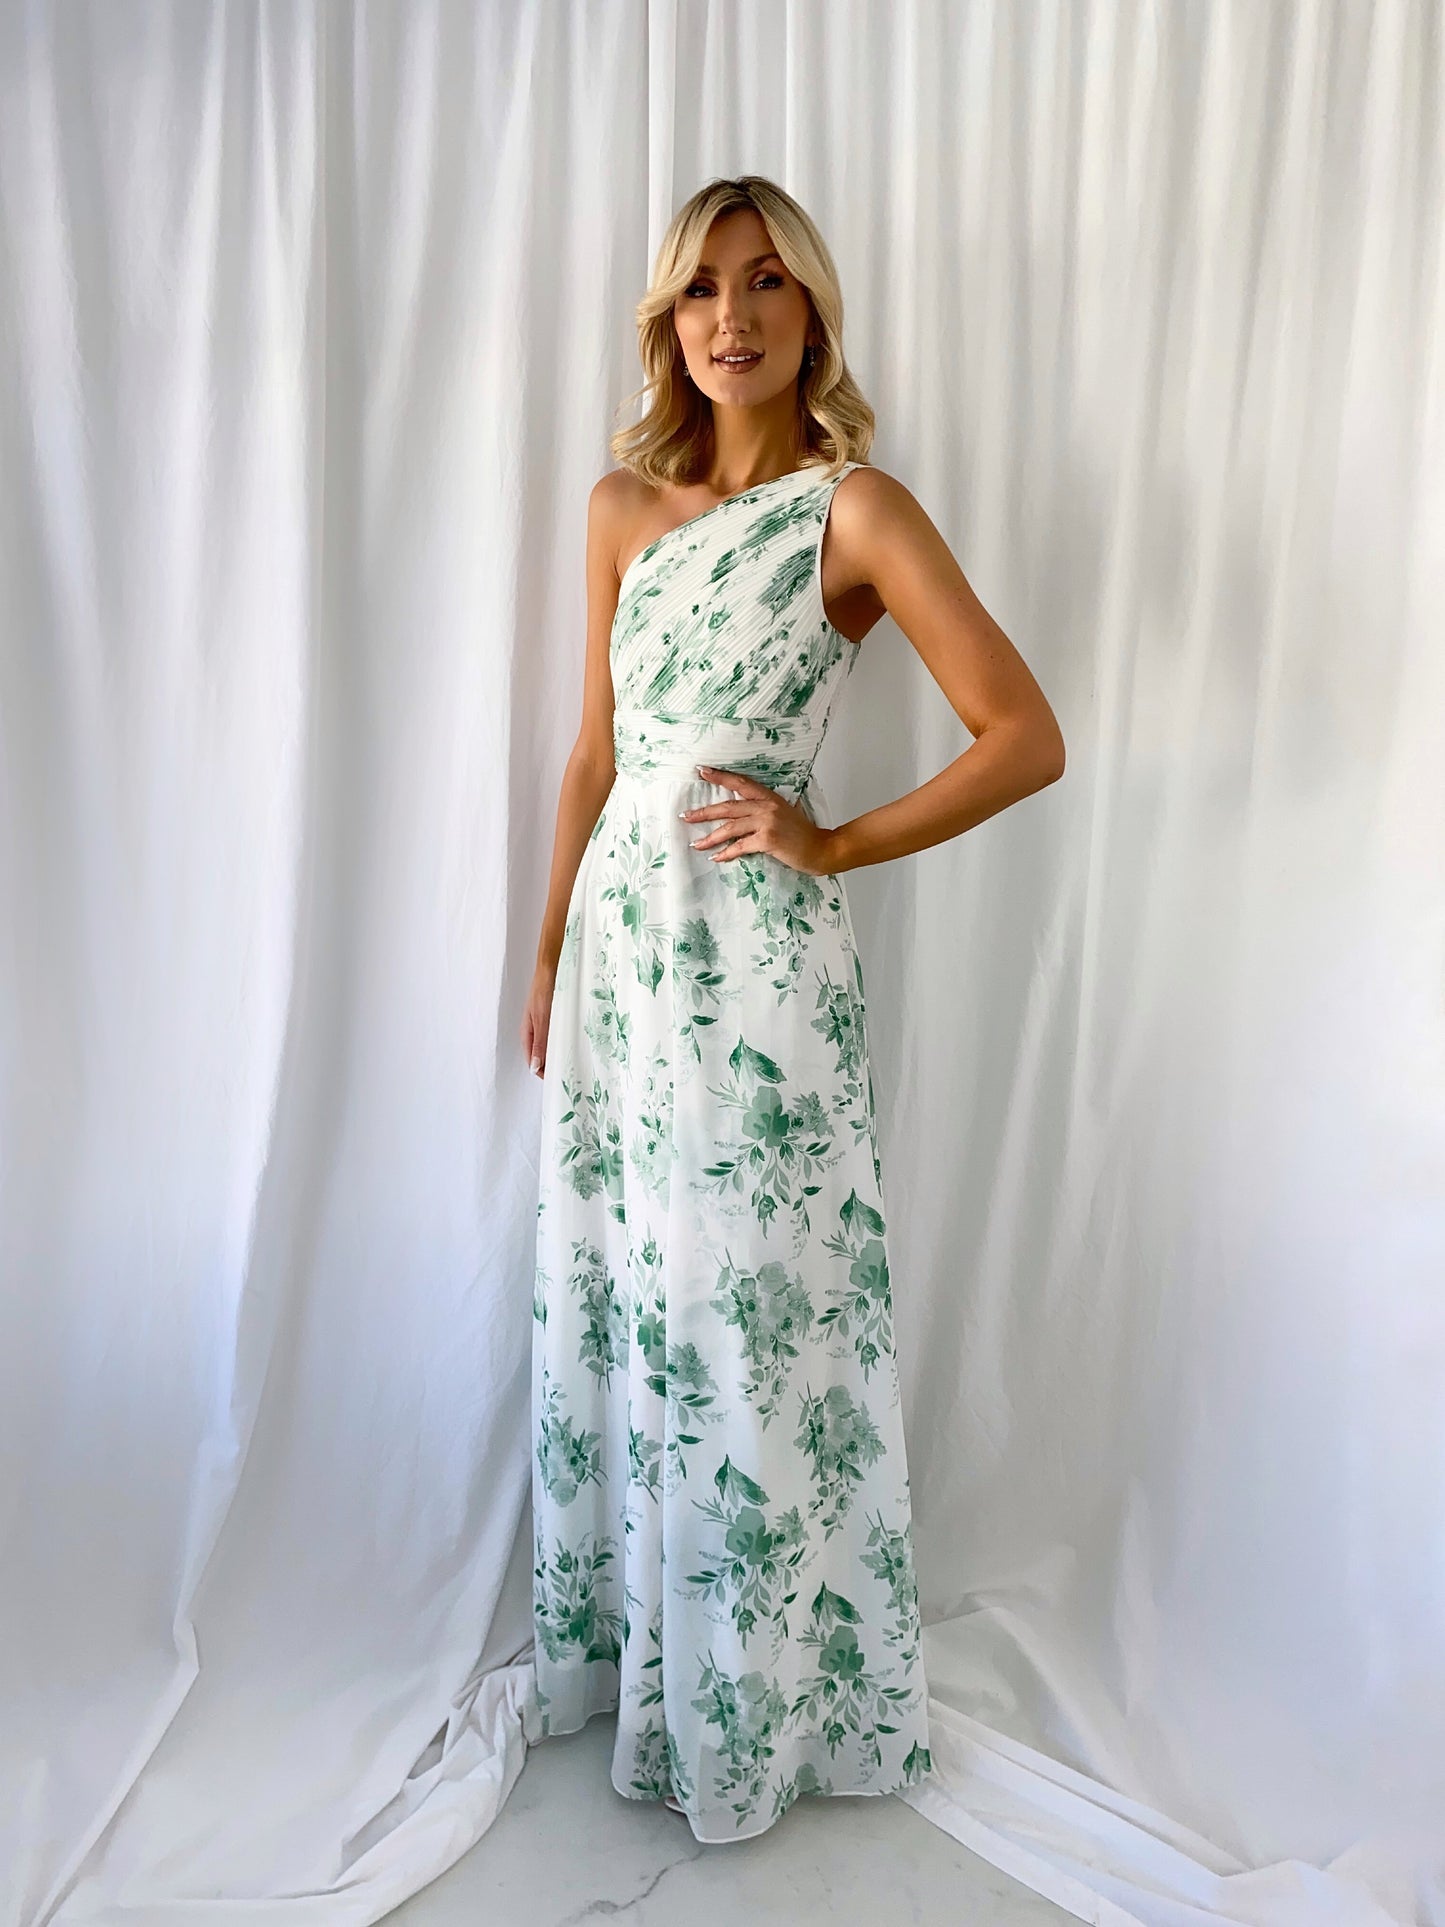 Stephanie One Shoulder Draped Top Floral Dress - Green